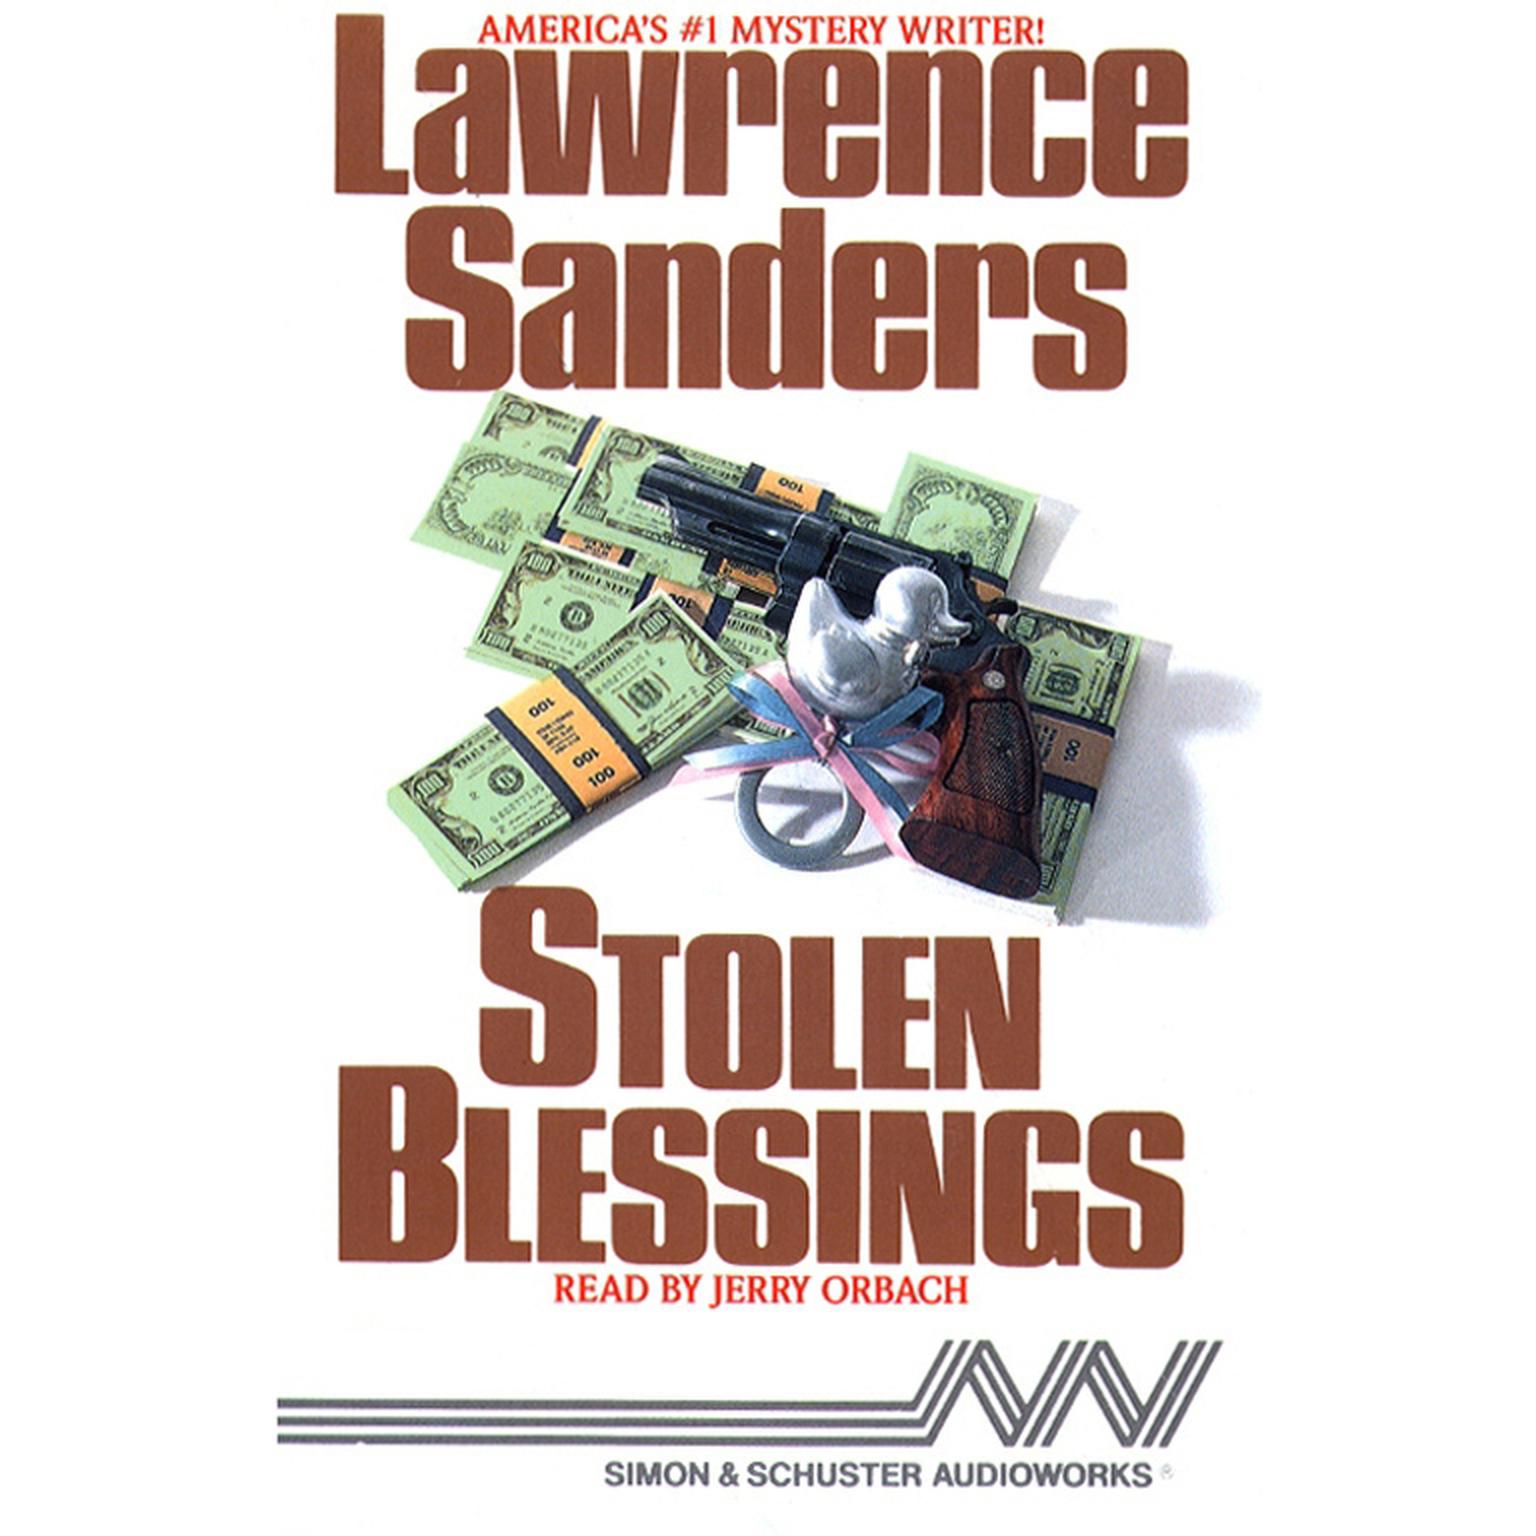 Stolen Blessings (Abridged) Audiobook, by Lawrence Sanders